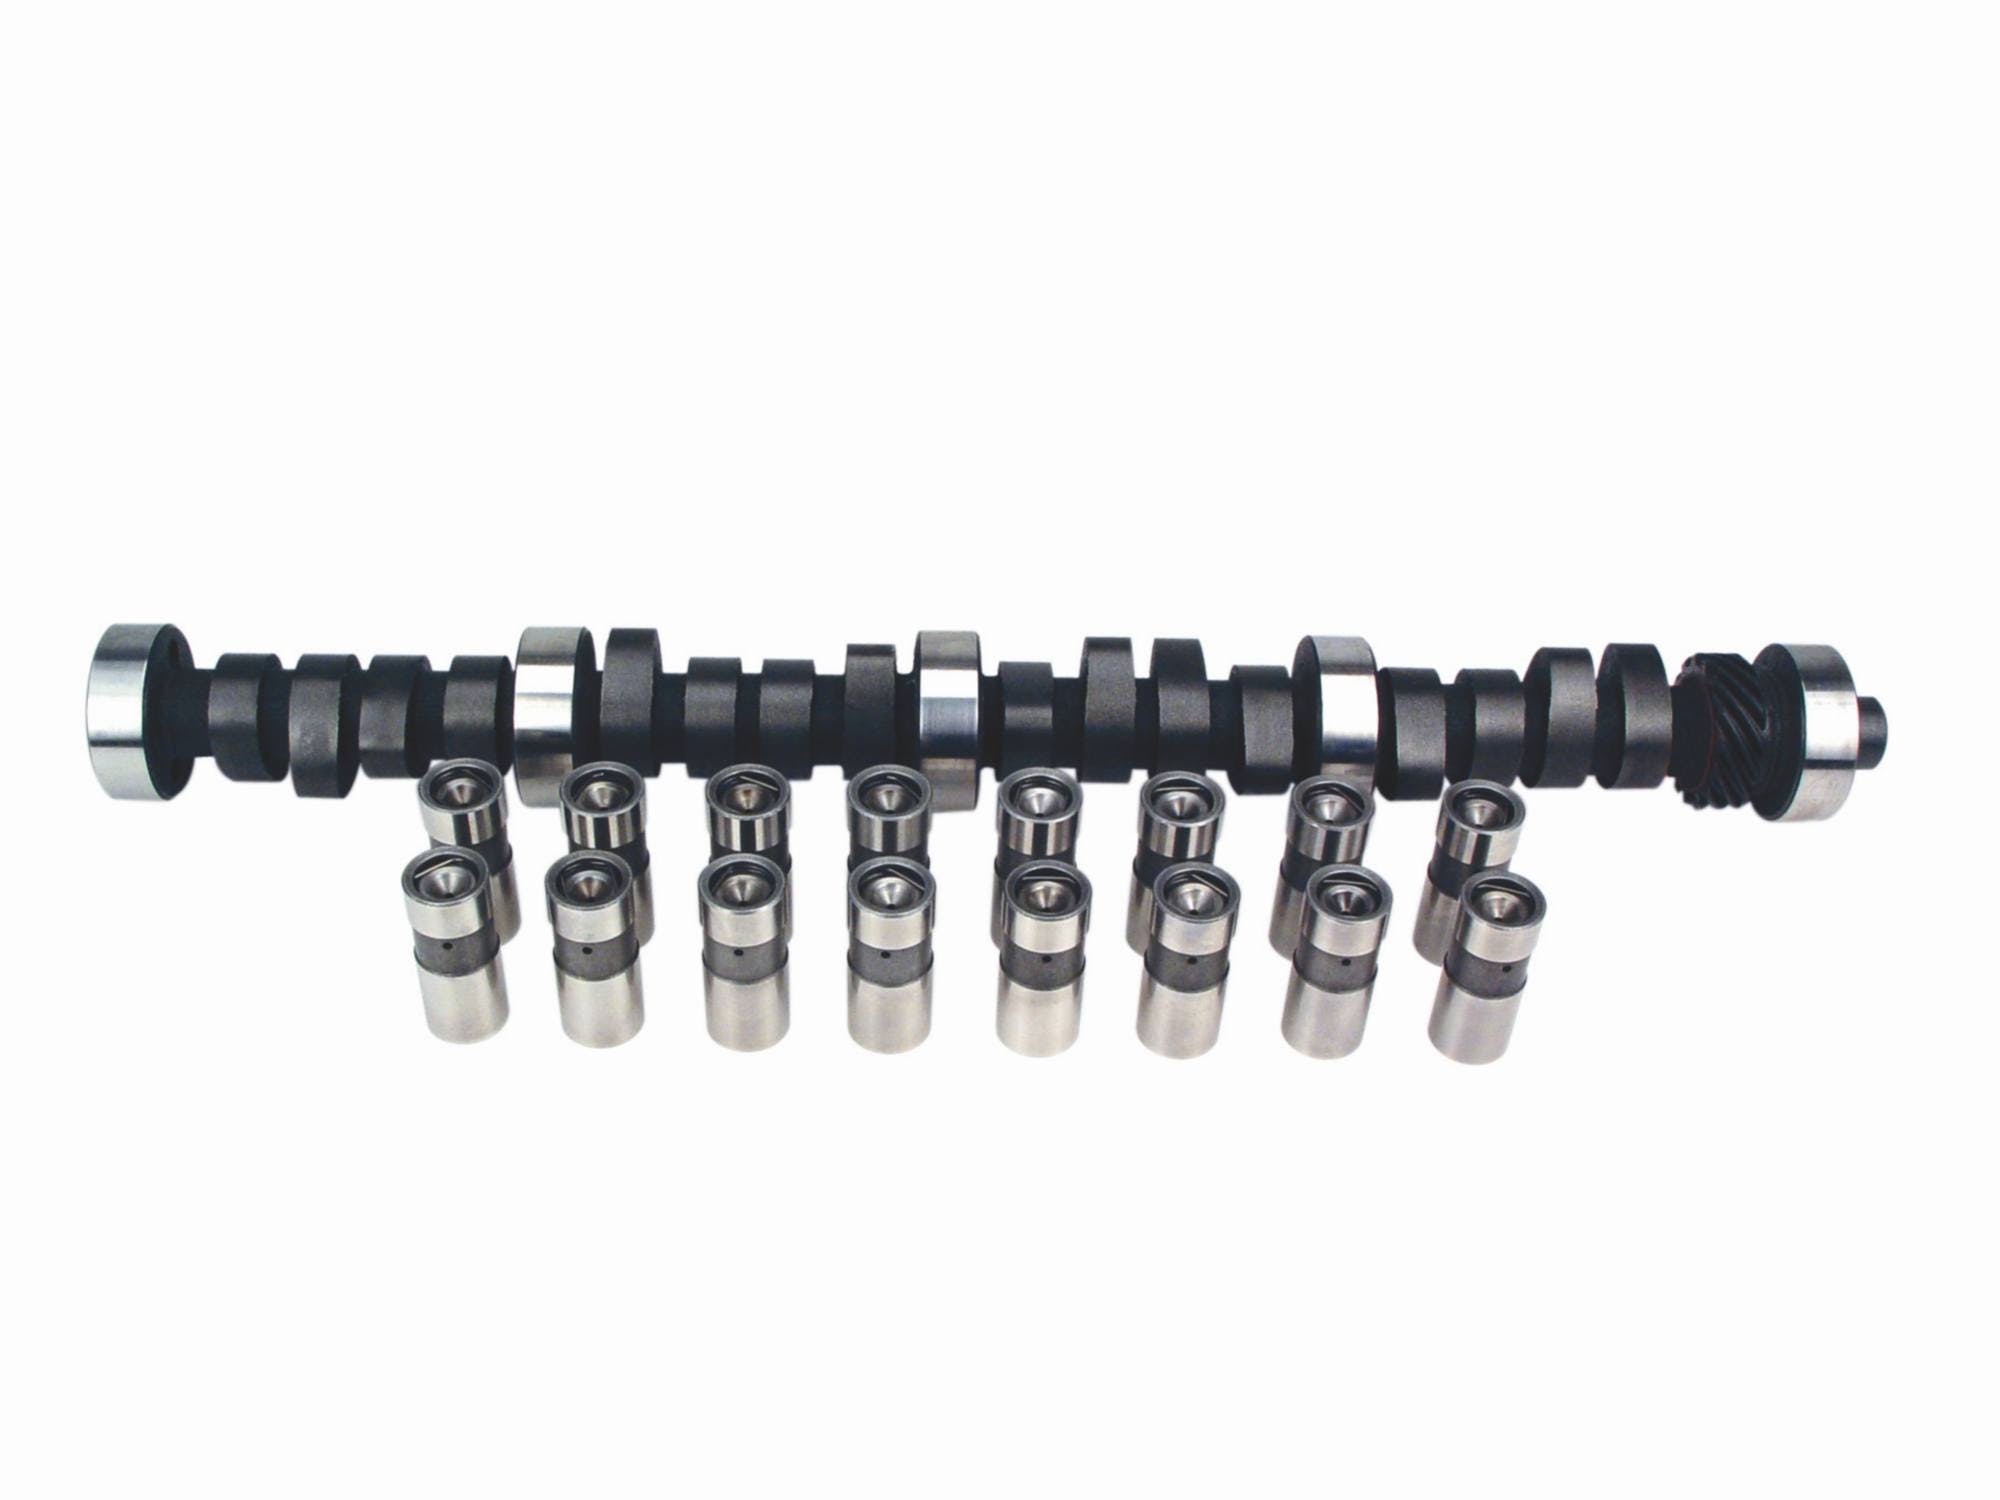 Competition Cams CL31-671-4 Nostalgia Plus Camshaft/Lifter Kit